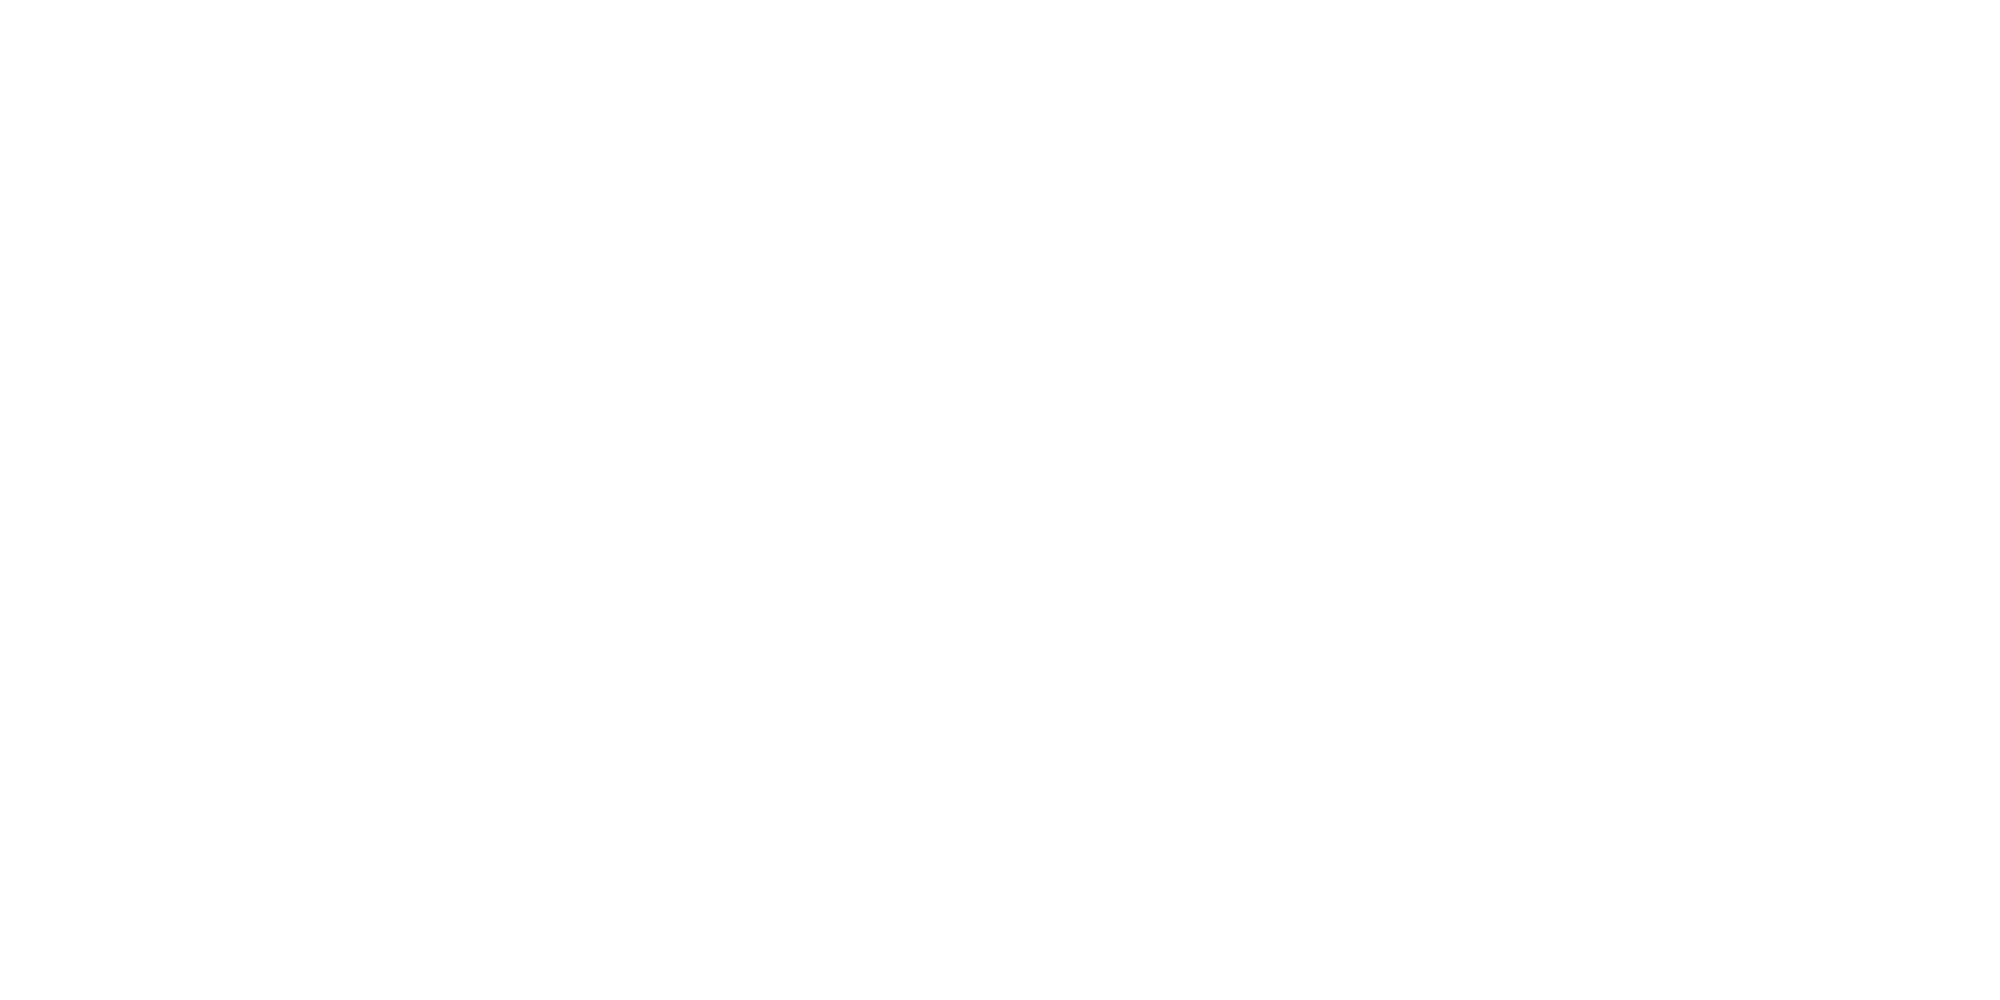 Global Electronique